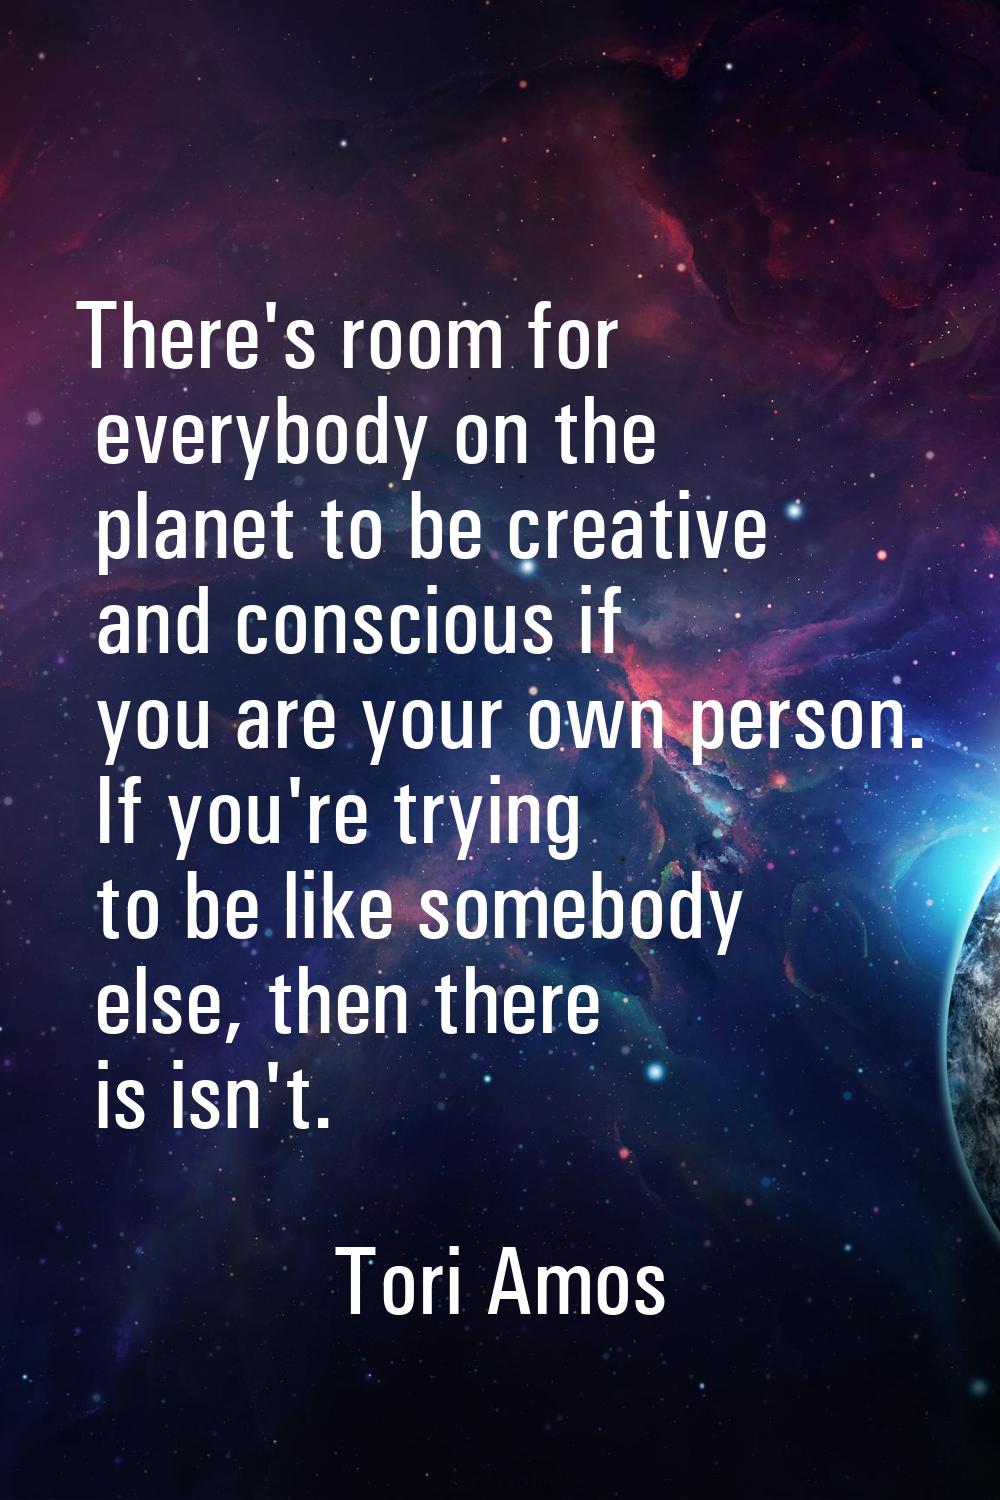 There's room for everybody on the planet to be creative and conscious if you are your own person. I